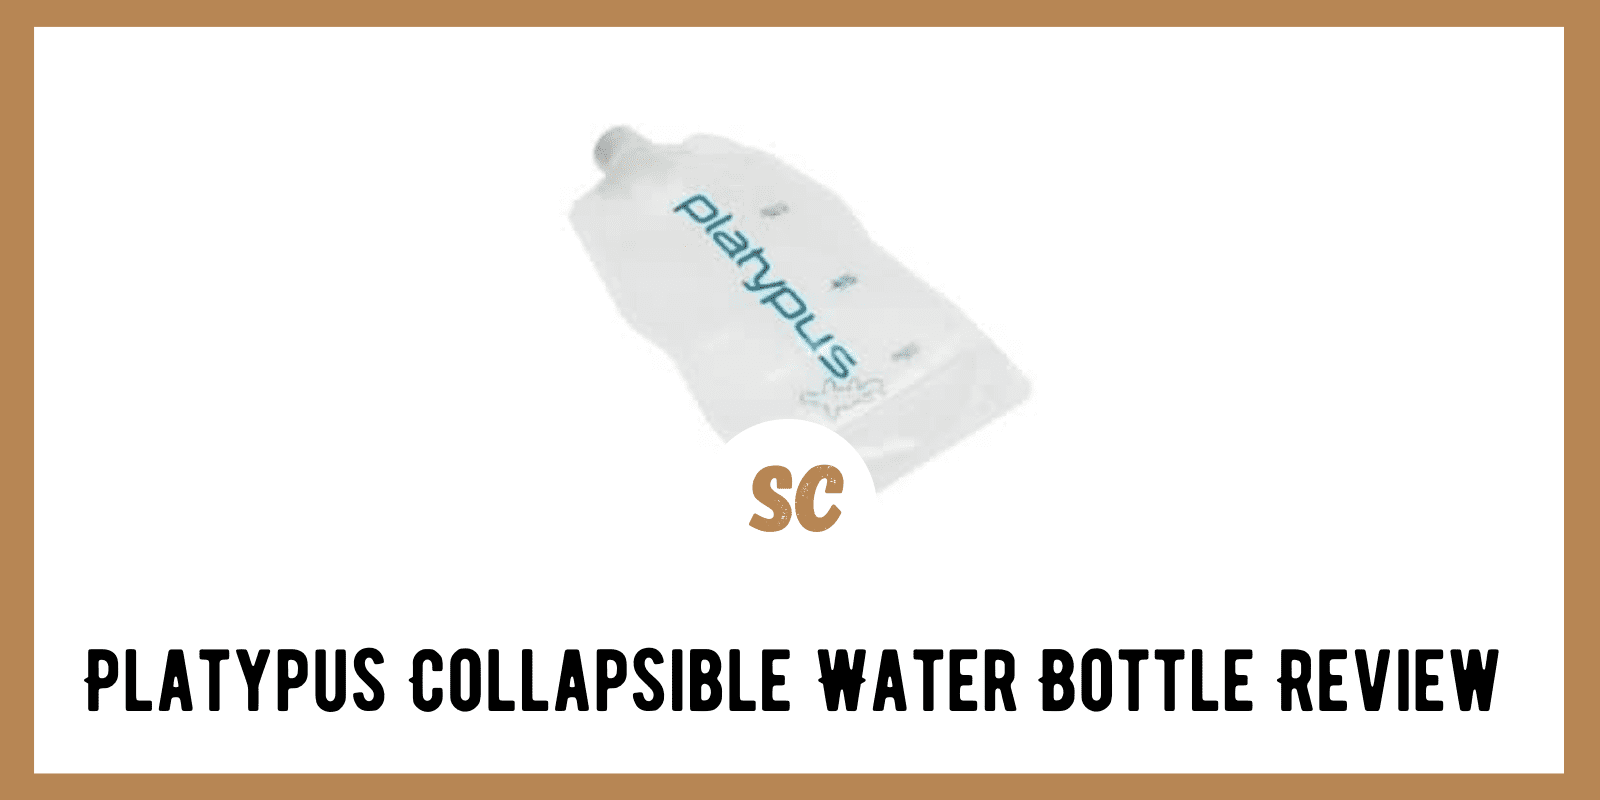 Platypus Collapsible Water Bottle Review